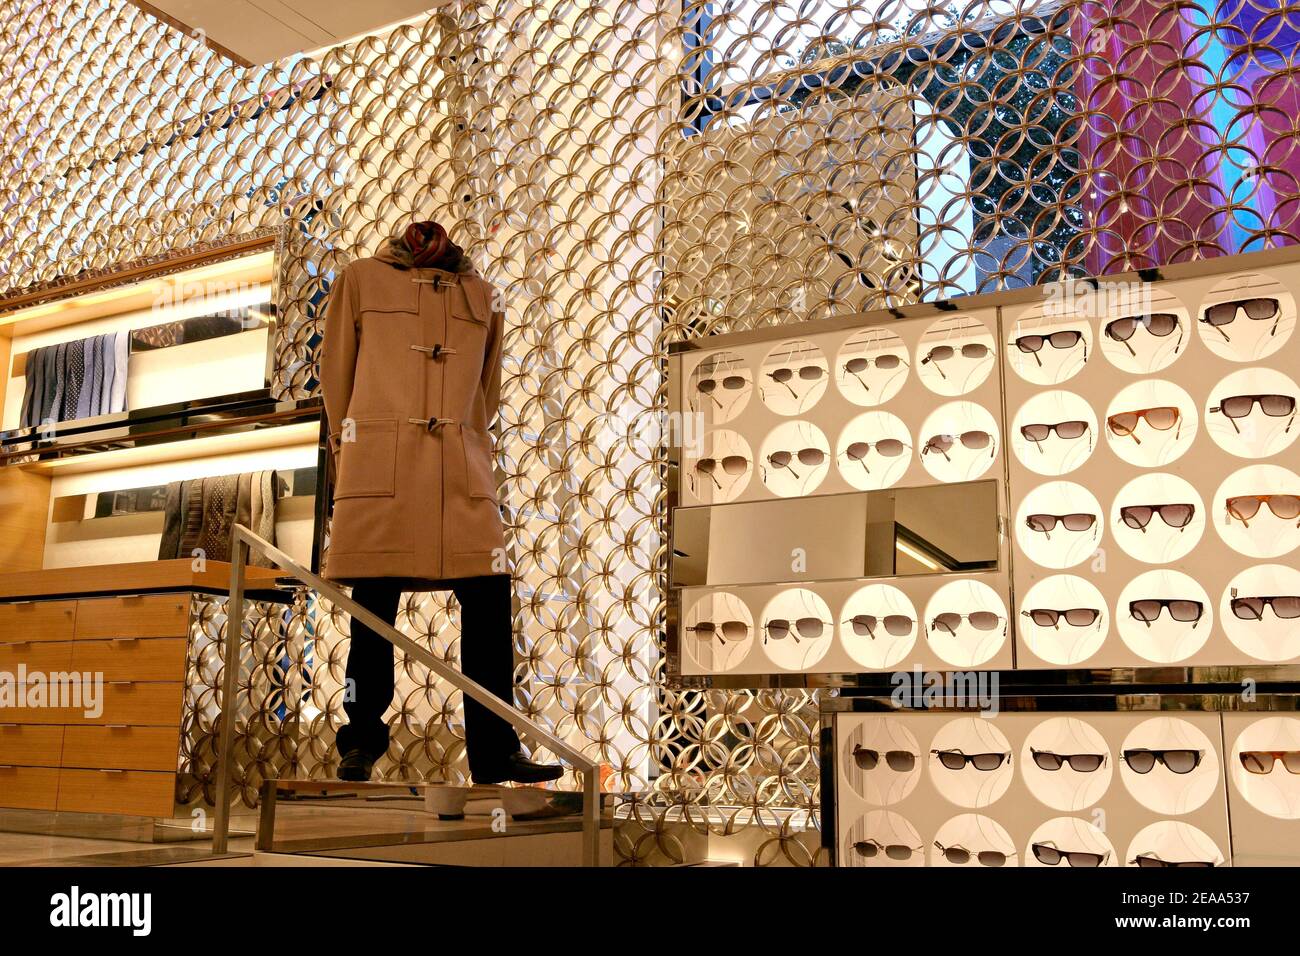 Louis Vuitton store by Peter Marino